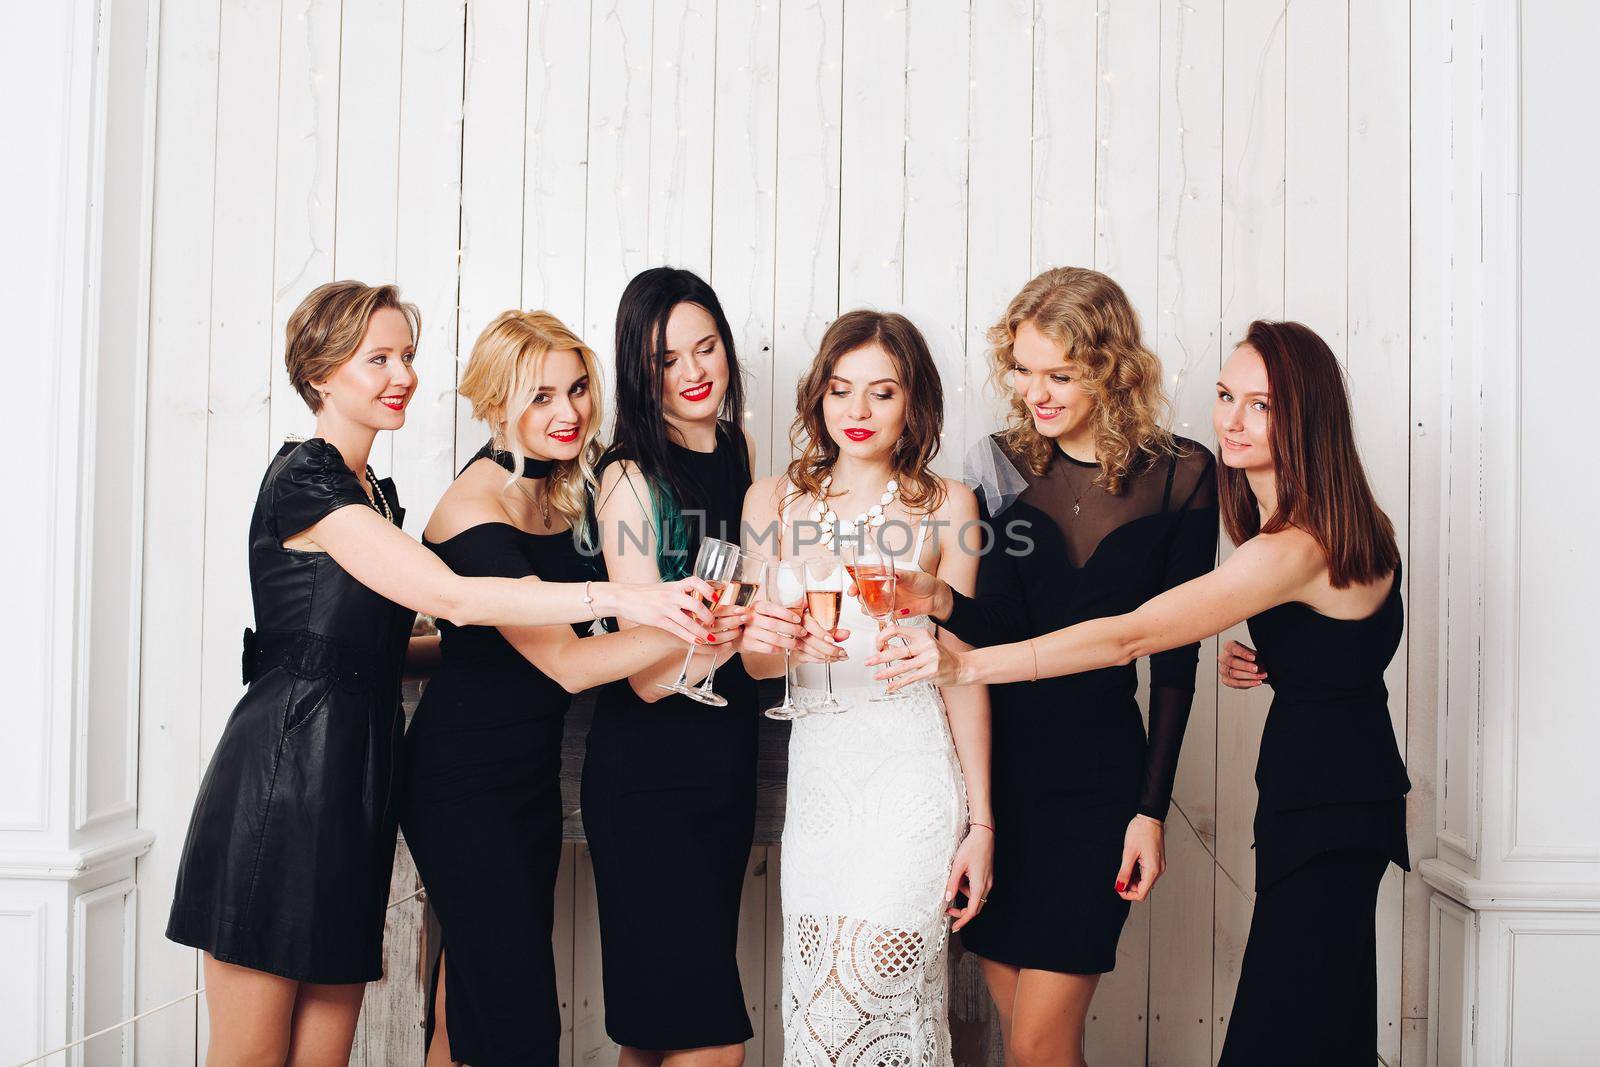 Portrait of beautiful elegant bridesmaids in black dresses toasting glasses of champagne with bride-to-be in lovely white dress.